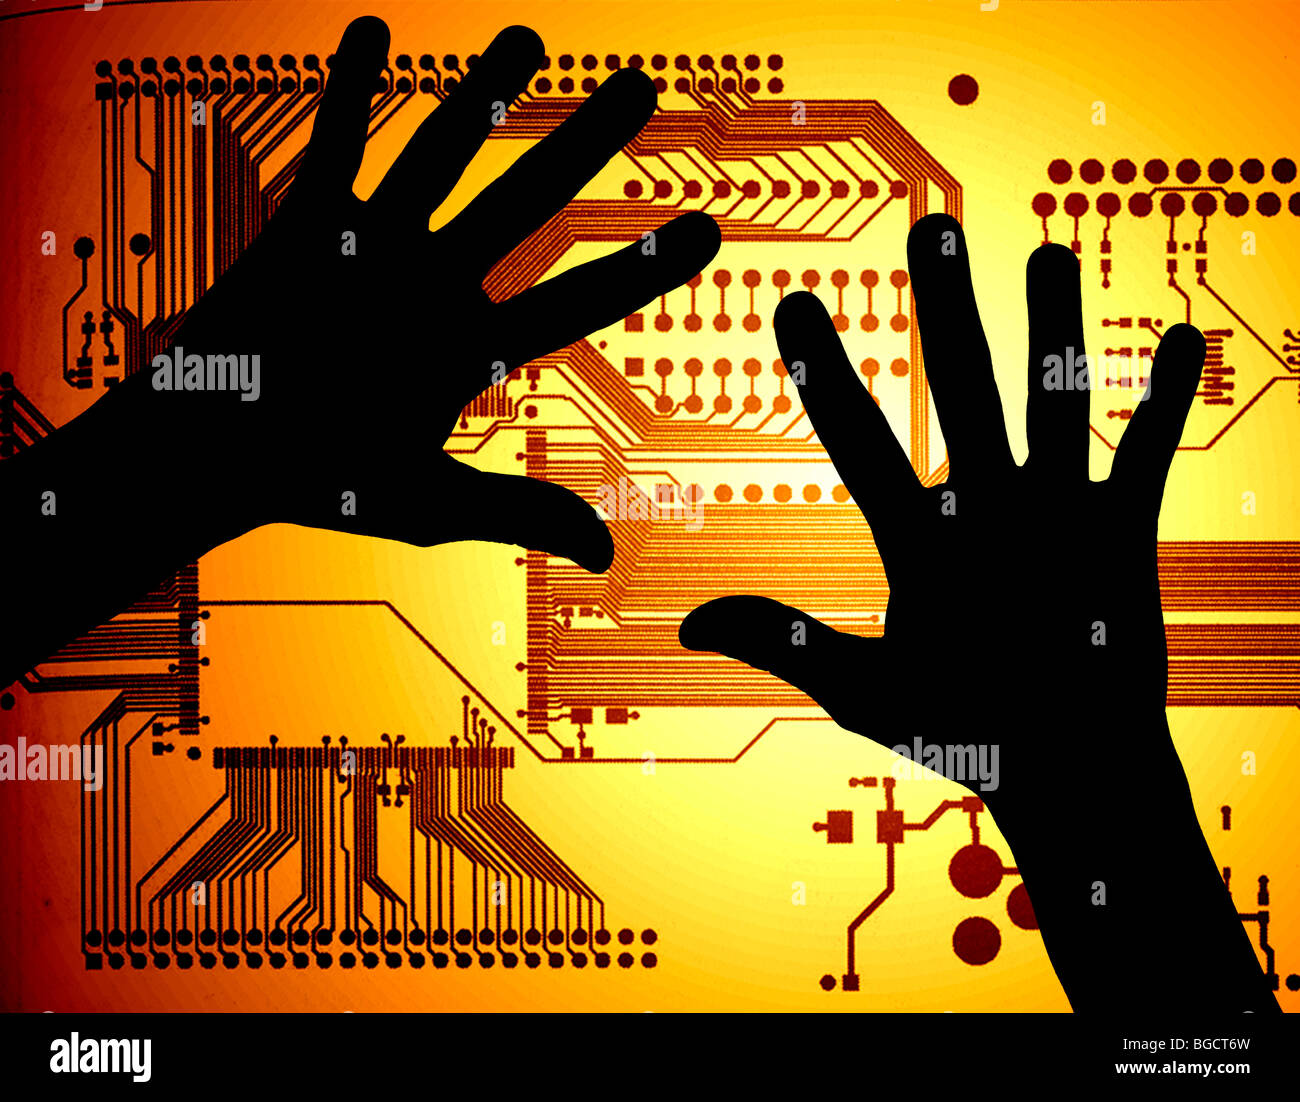 hands silhouetted over high tech circuit board illustration Stock Photo